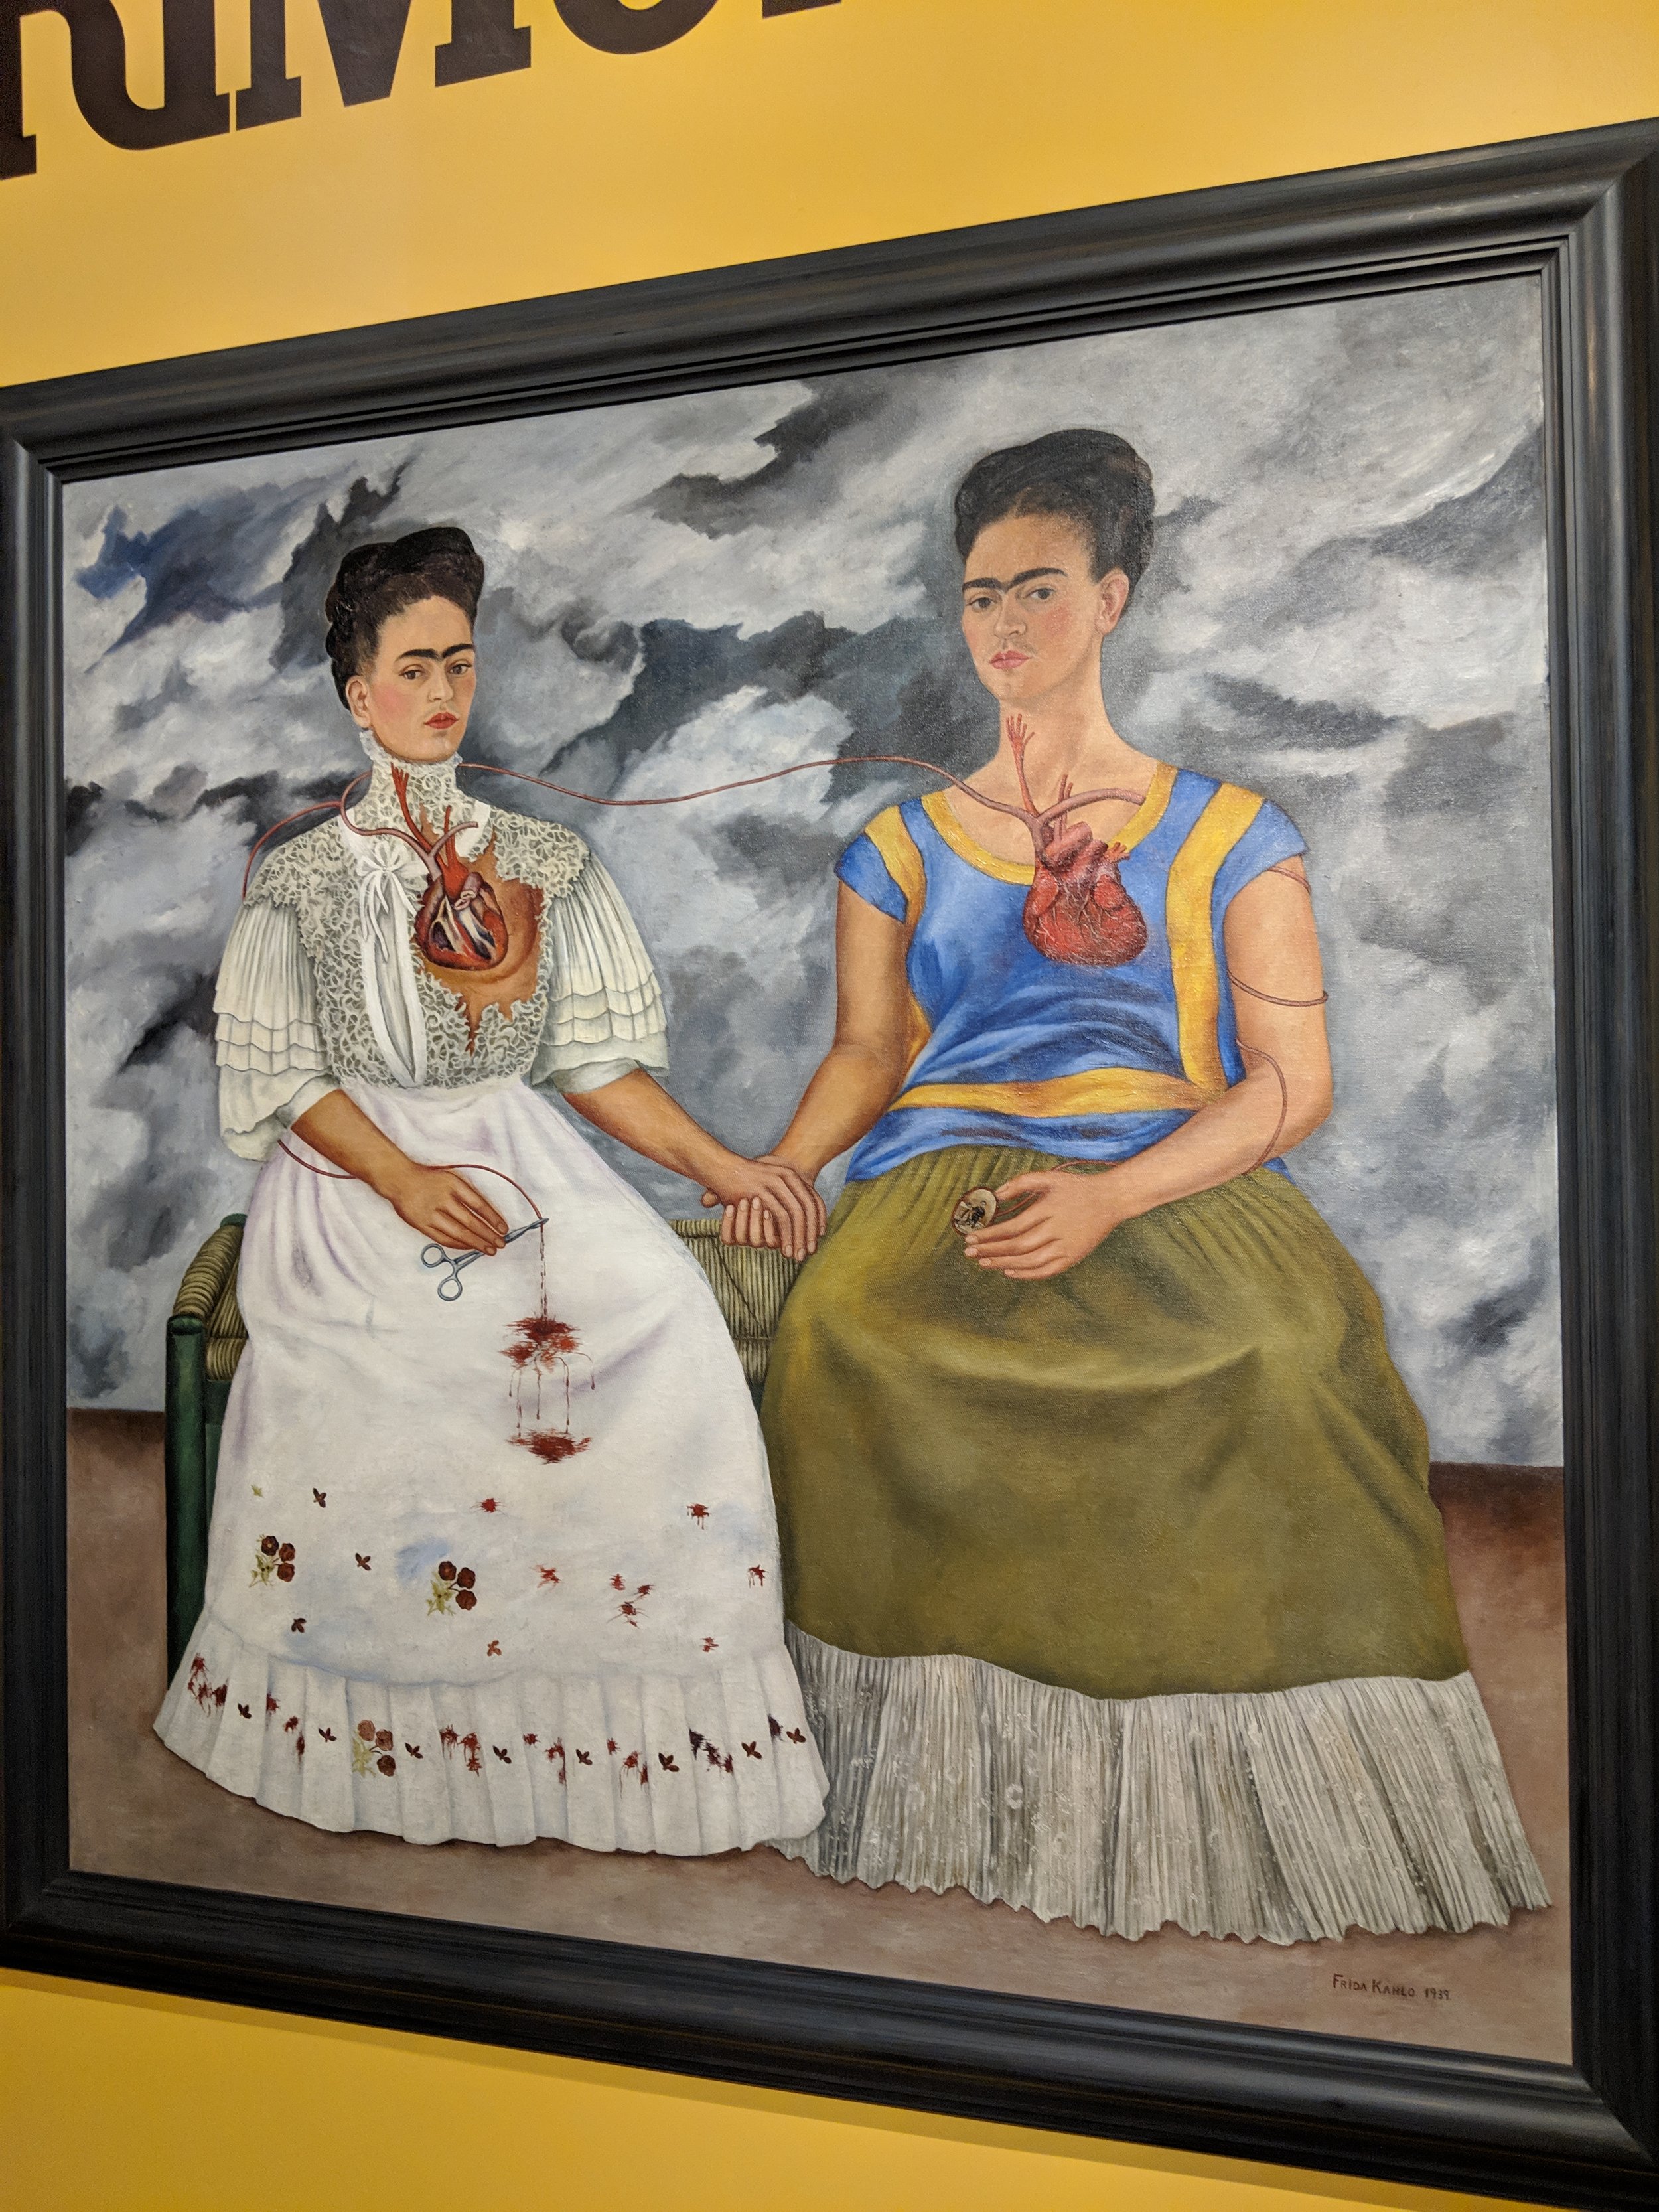 My first Frida Kahlo painting